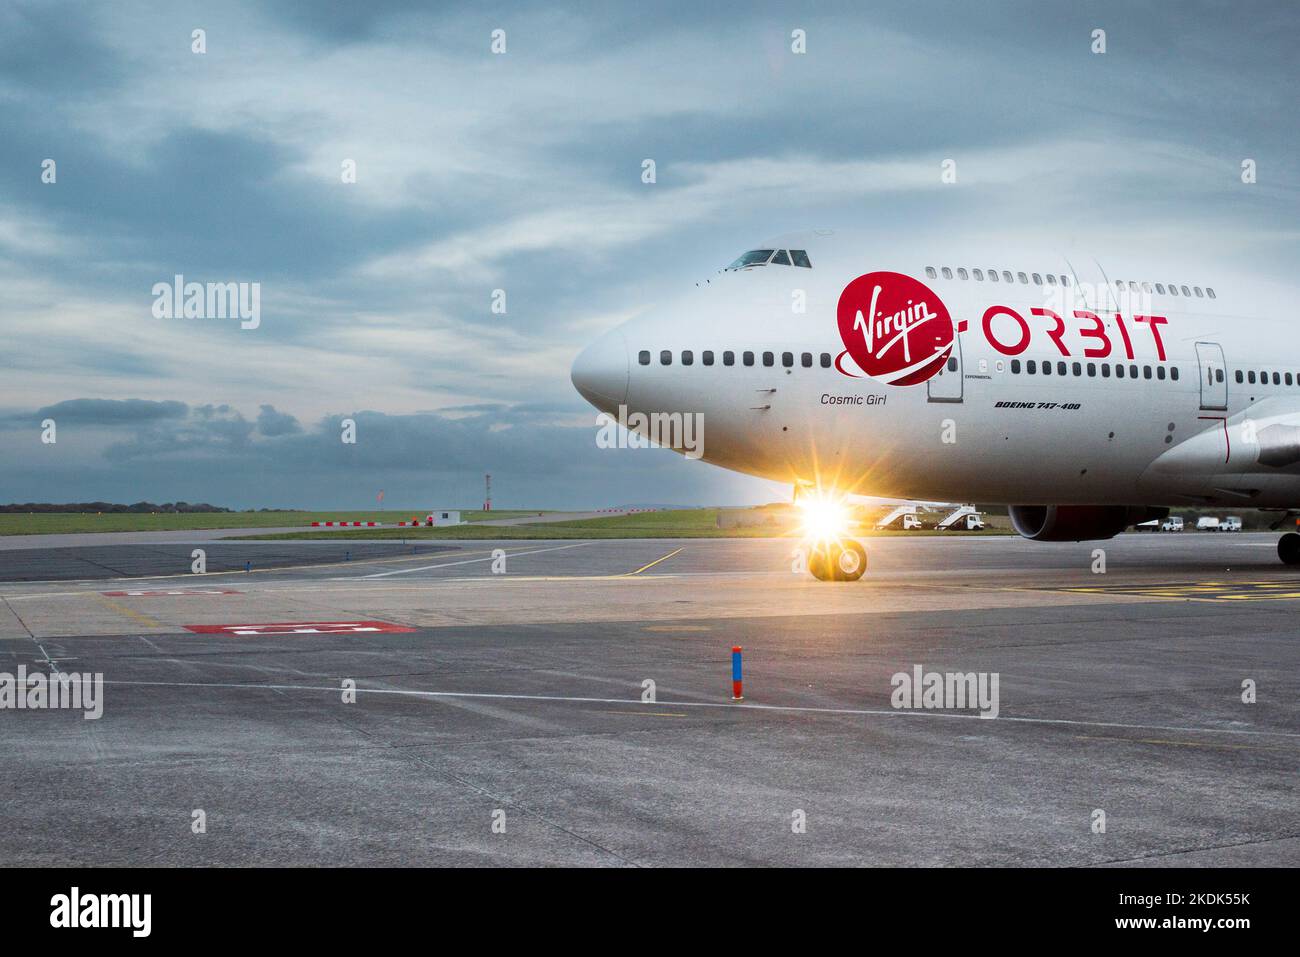 Virgin logo on the fuselage of the Virgin Orbit, Cosmic Girl, a 747-400 converted to a rocket launch platform taxiing at Spaceport Cornwall Stock Photo